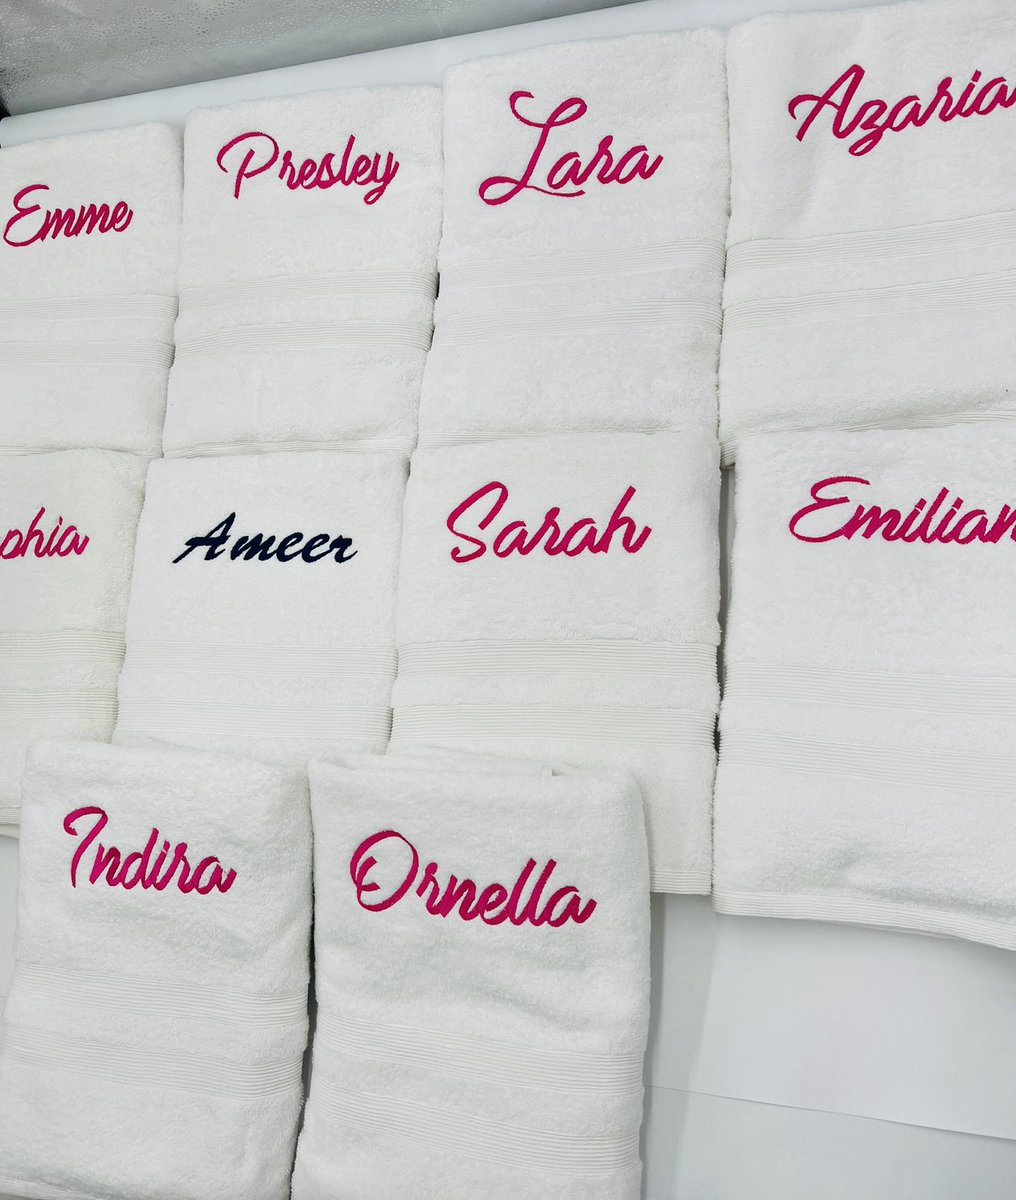 30% off Sitewide w/Free UPS Ground Shipping! Personalized 100% Cotton Bath Towels loom.ly/mnv8OV8 
#anniversarygift #bathtowel #graduationgift #birthdaygift #mothersdaygift #personalizedtowel #weddingtowel #customizedtowel #personalizetowel #embroidertowel #etsy #events